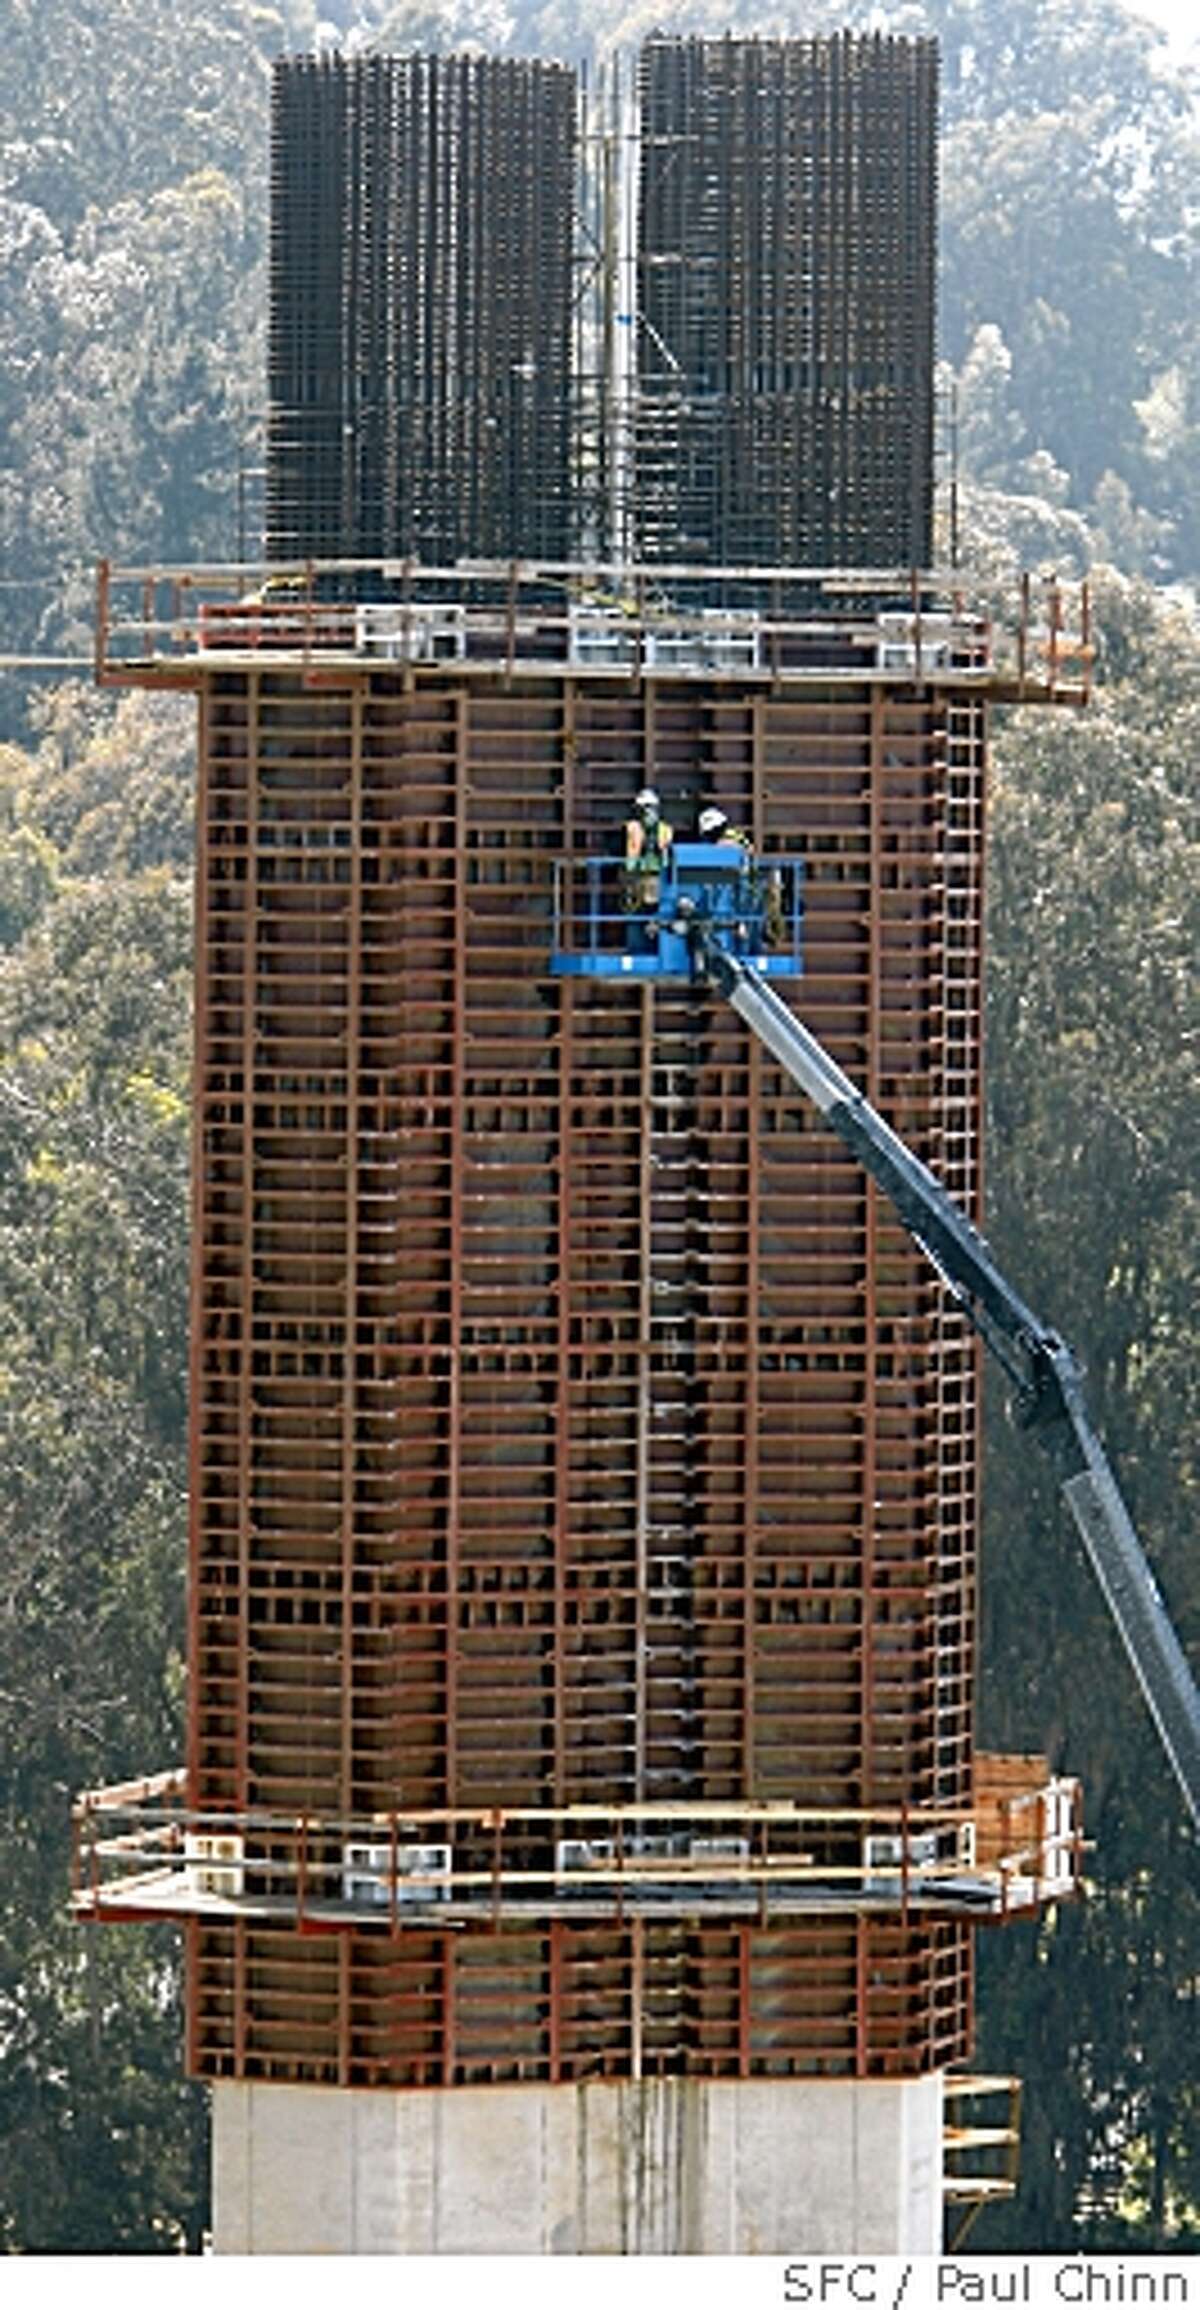 A construction crew works on a column which will support the new eastern span of the Bay Bridge on Yerba Buena Island in San Francisco, Calif. on Tuesday, May 6, 2008.Photo by Paul Chinn / San Francisco Chronicle